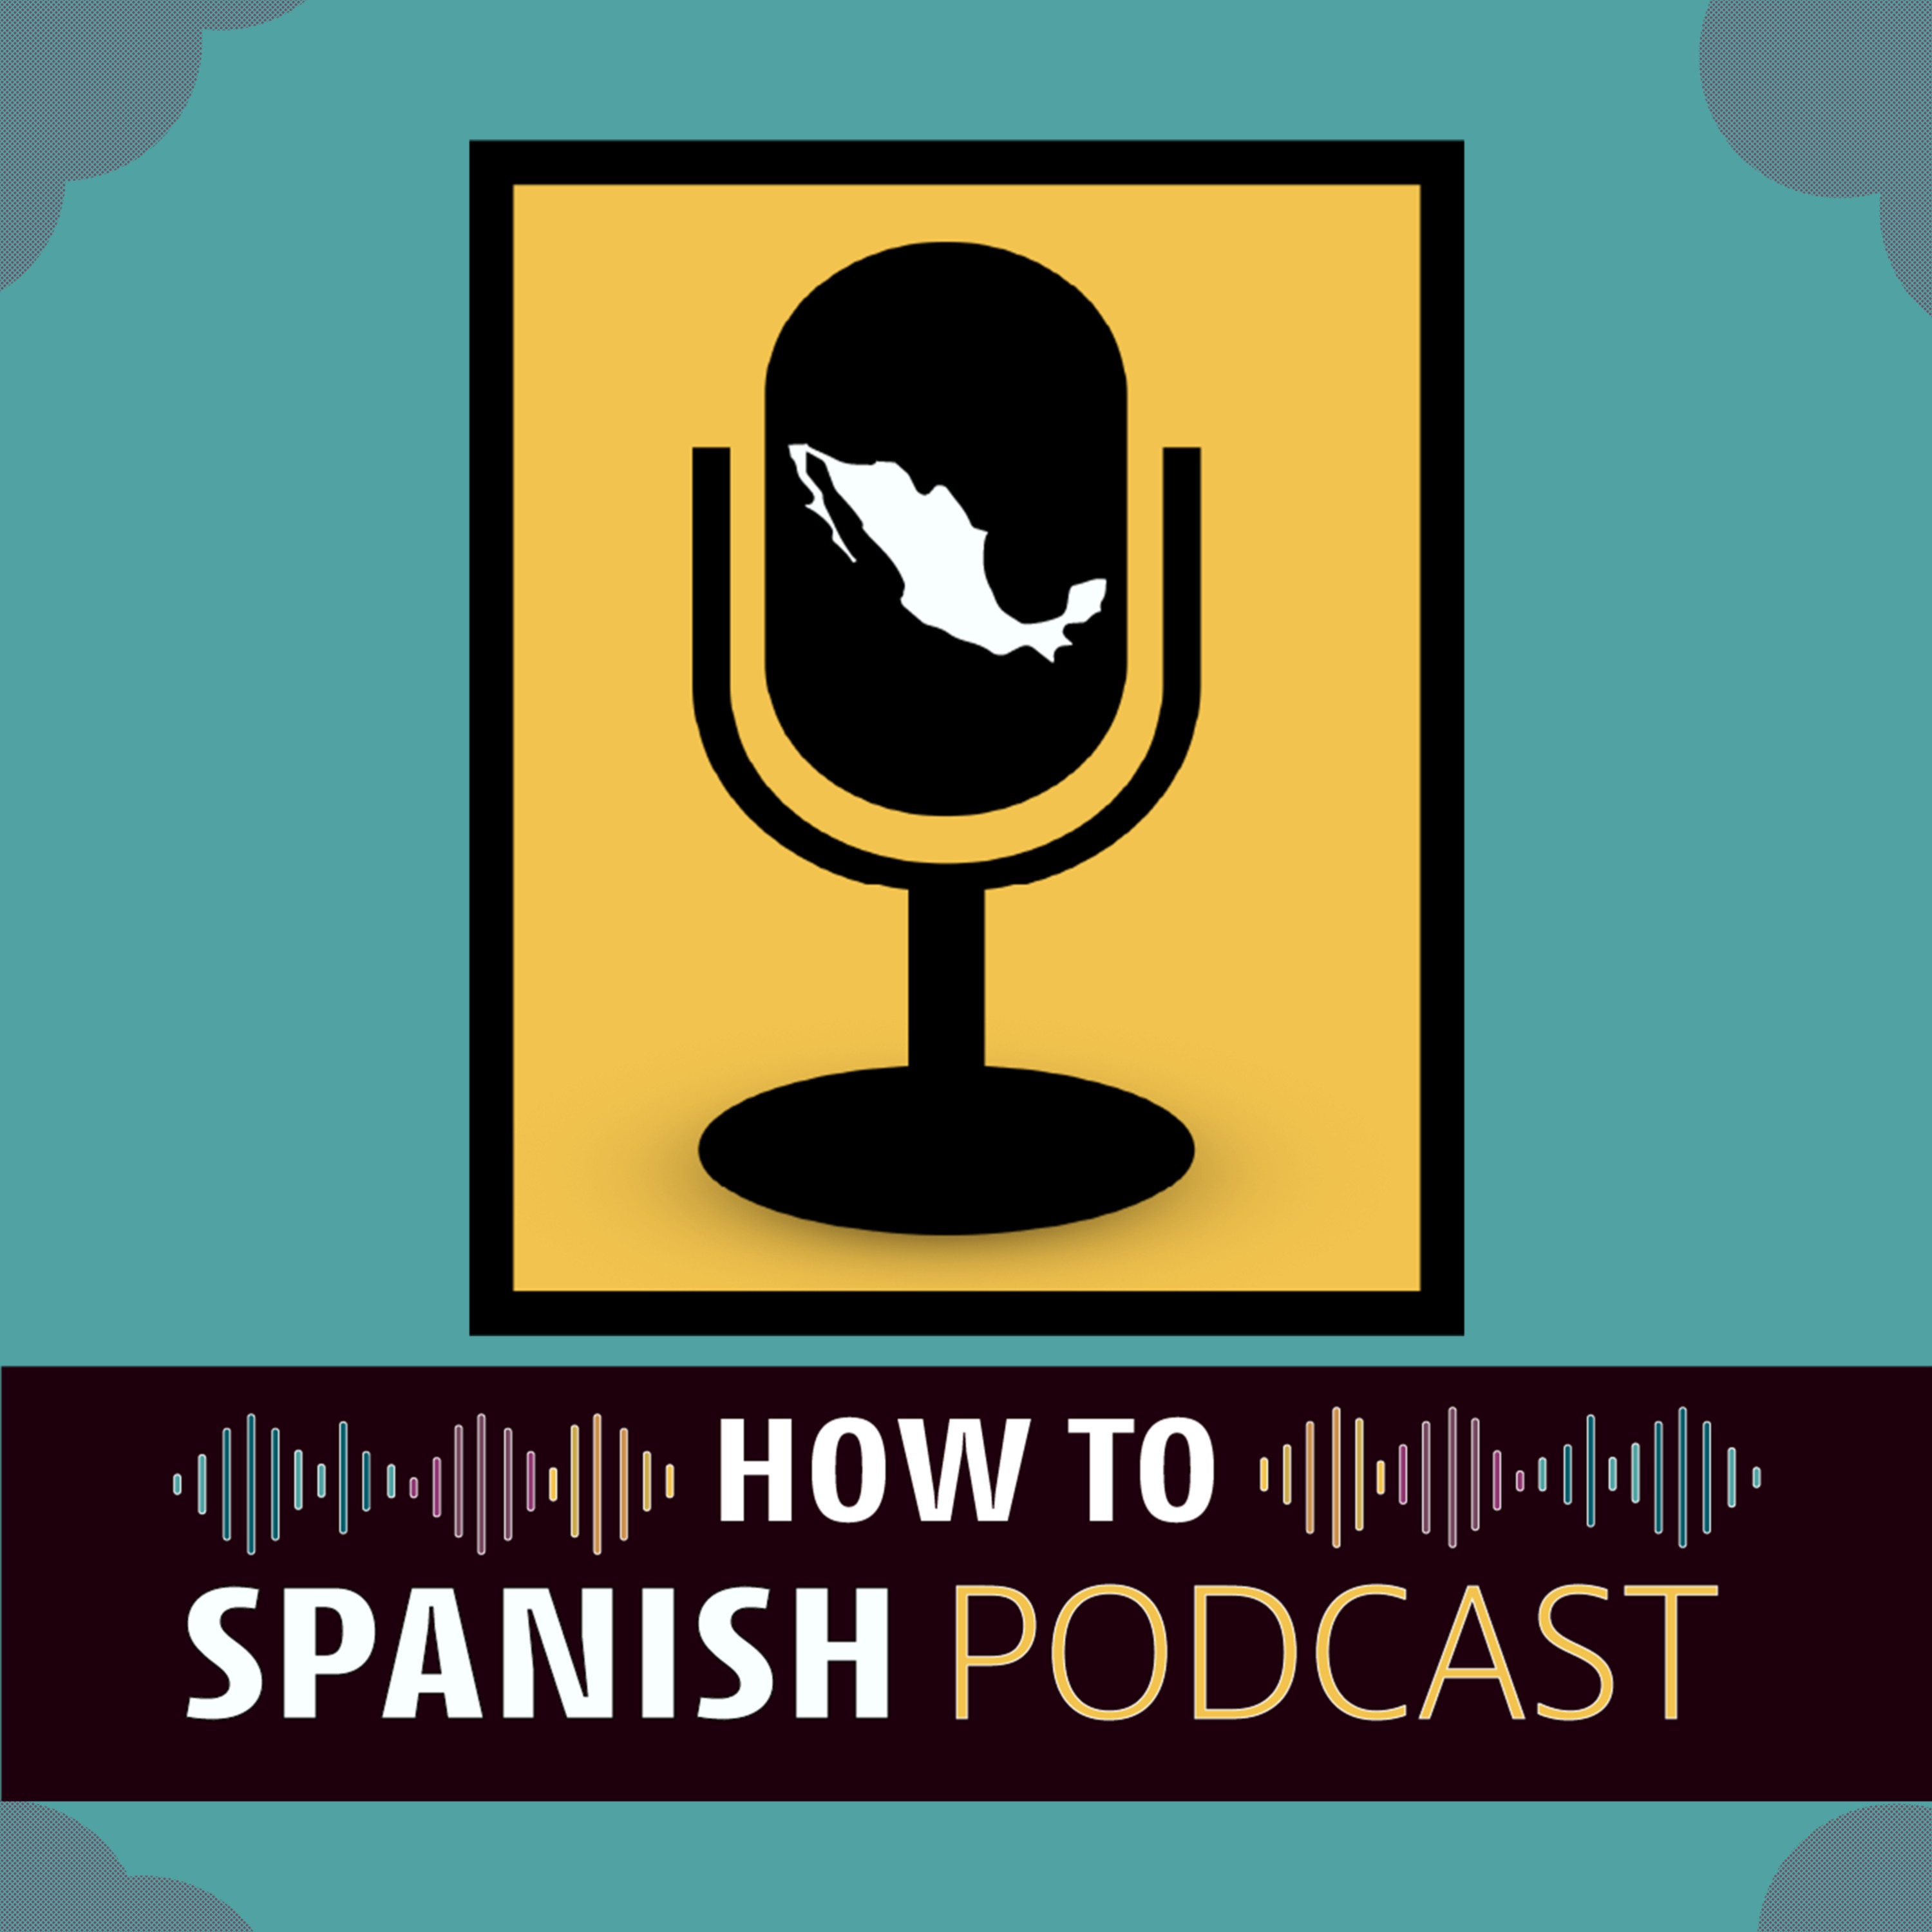 How to Spanish Podcast